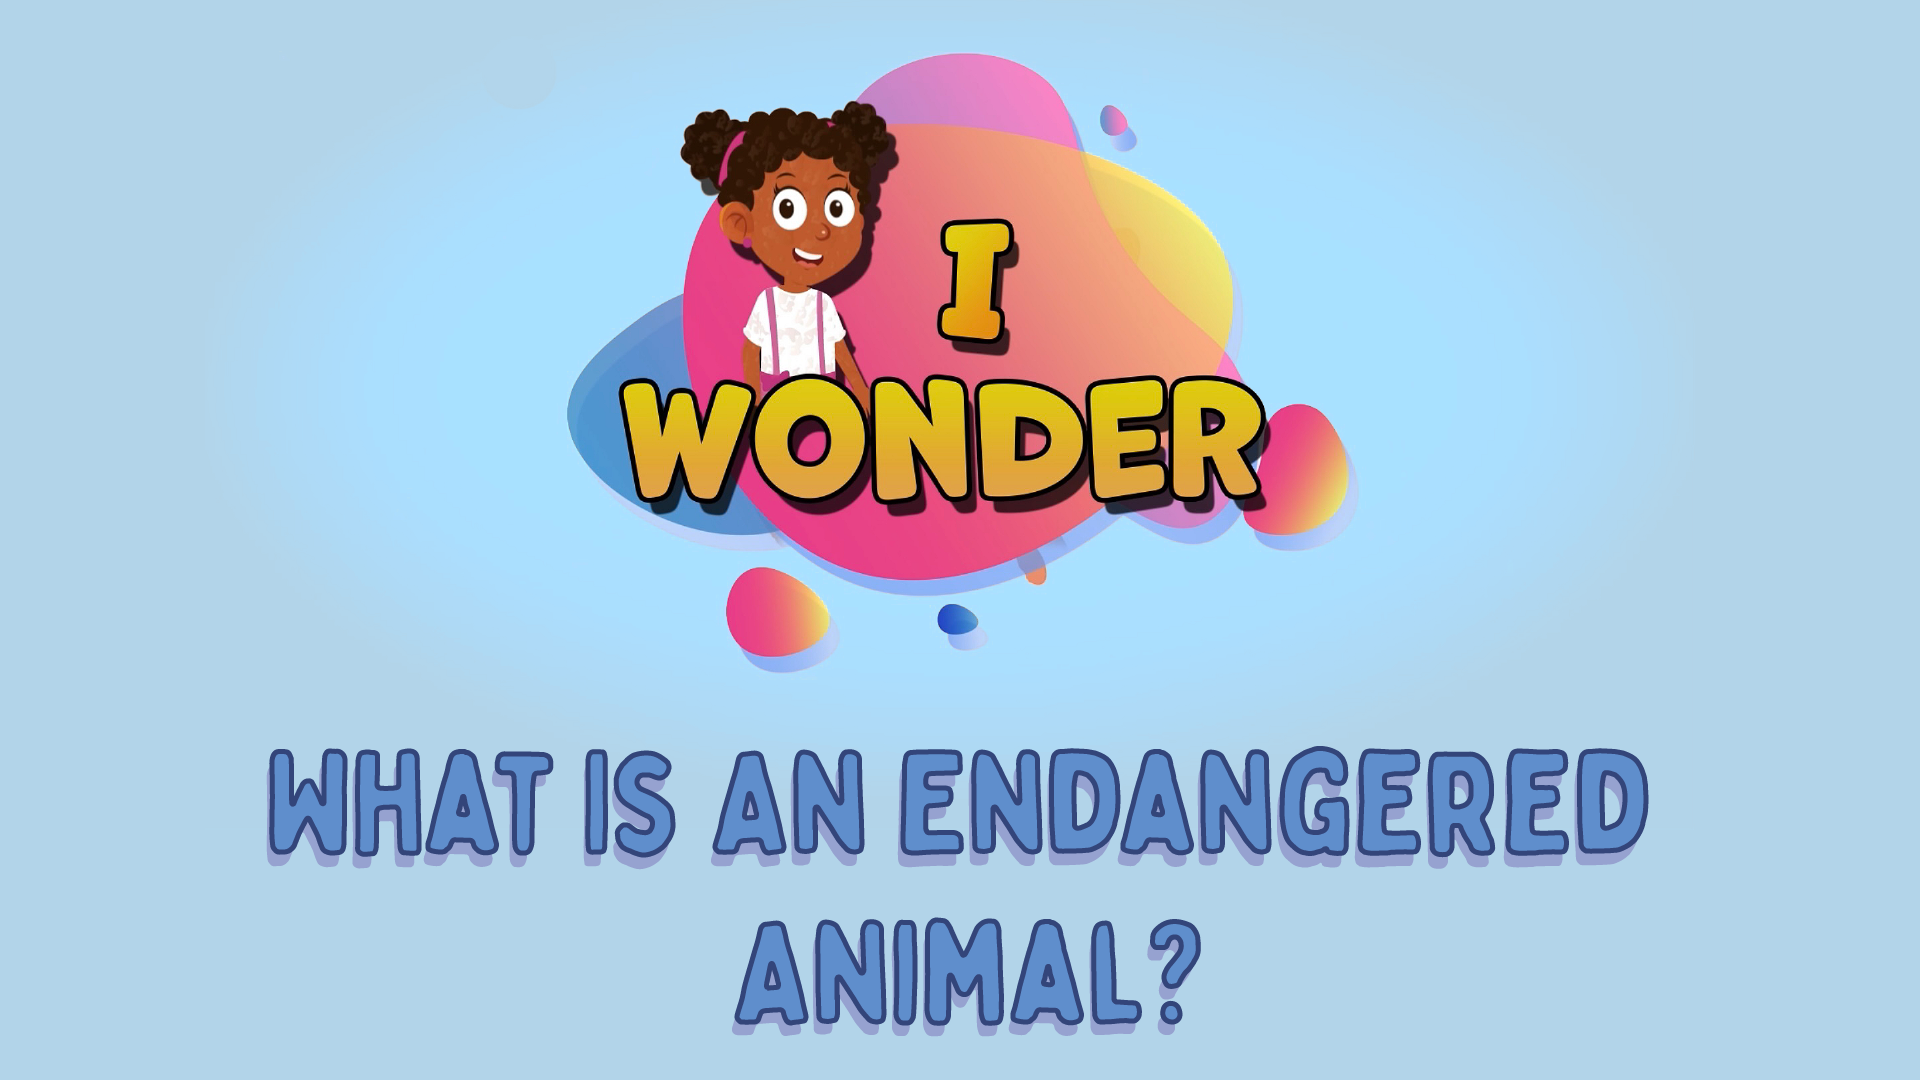 What Is An Endangered Animal?